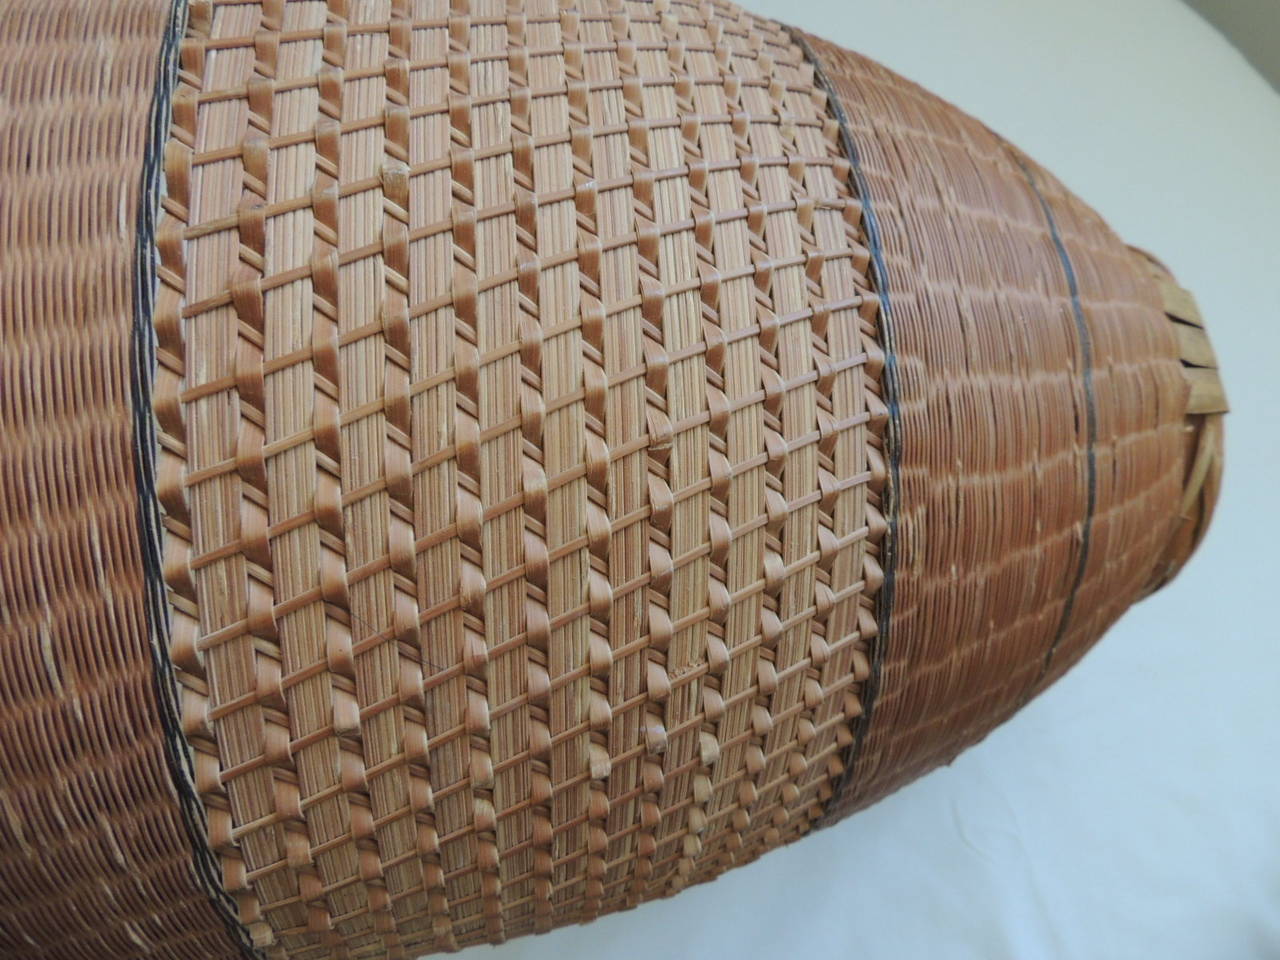 Hand-Crafted Asian Basket